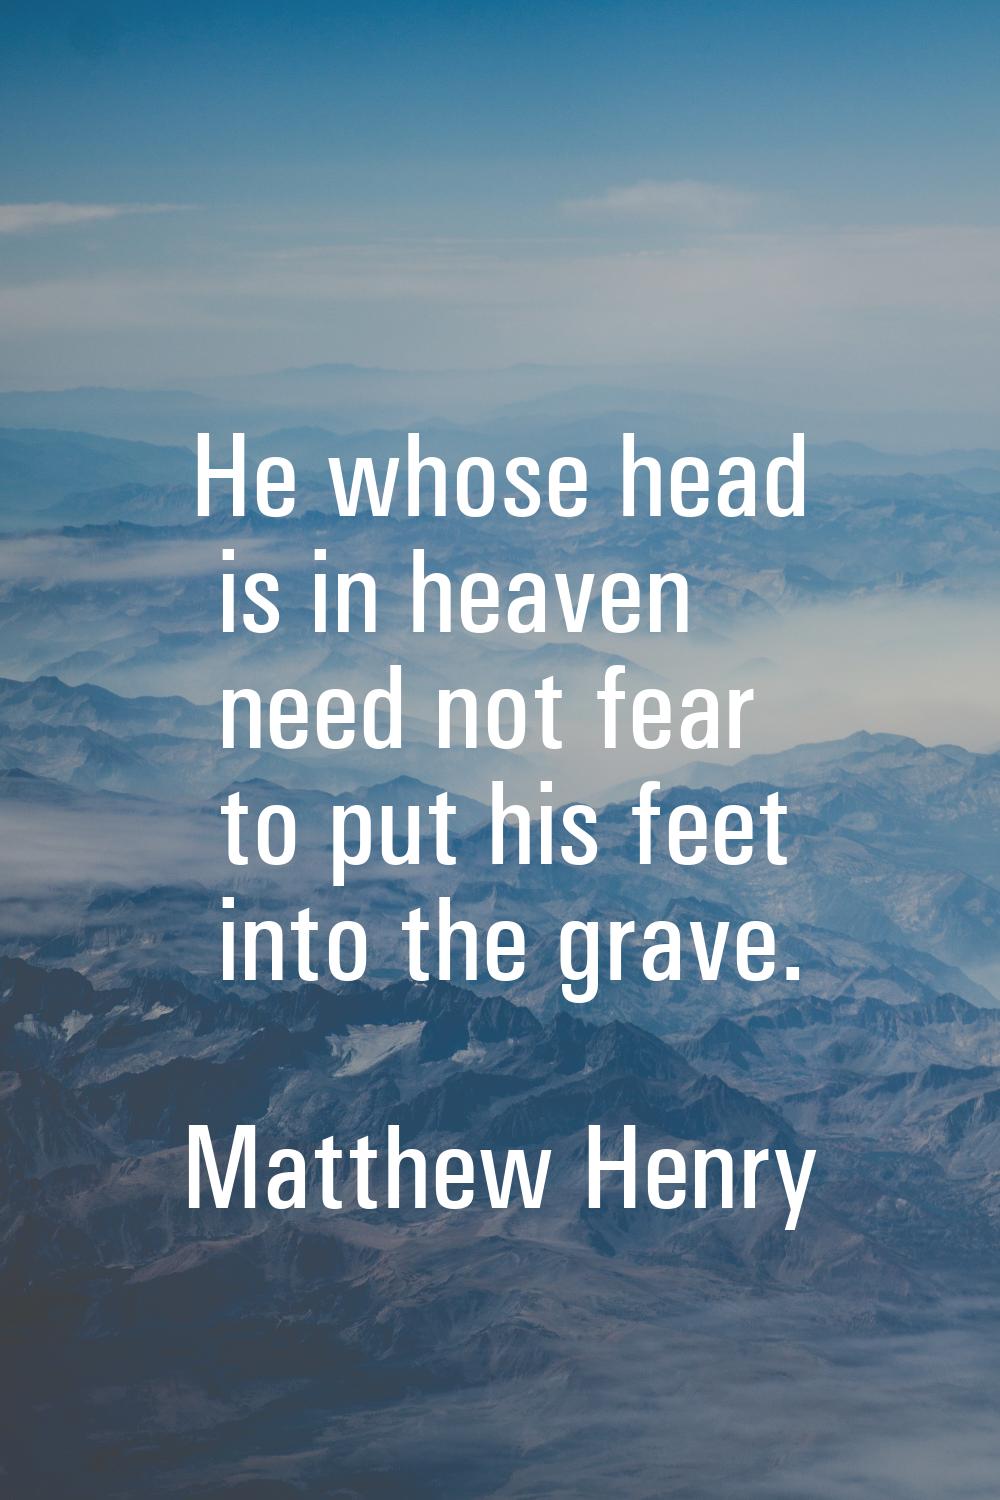 He whose head is in heaven need not fear to put his feet into the grave.